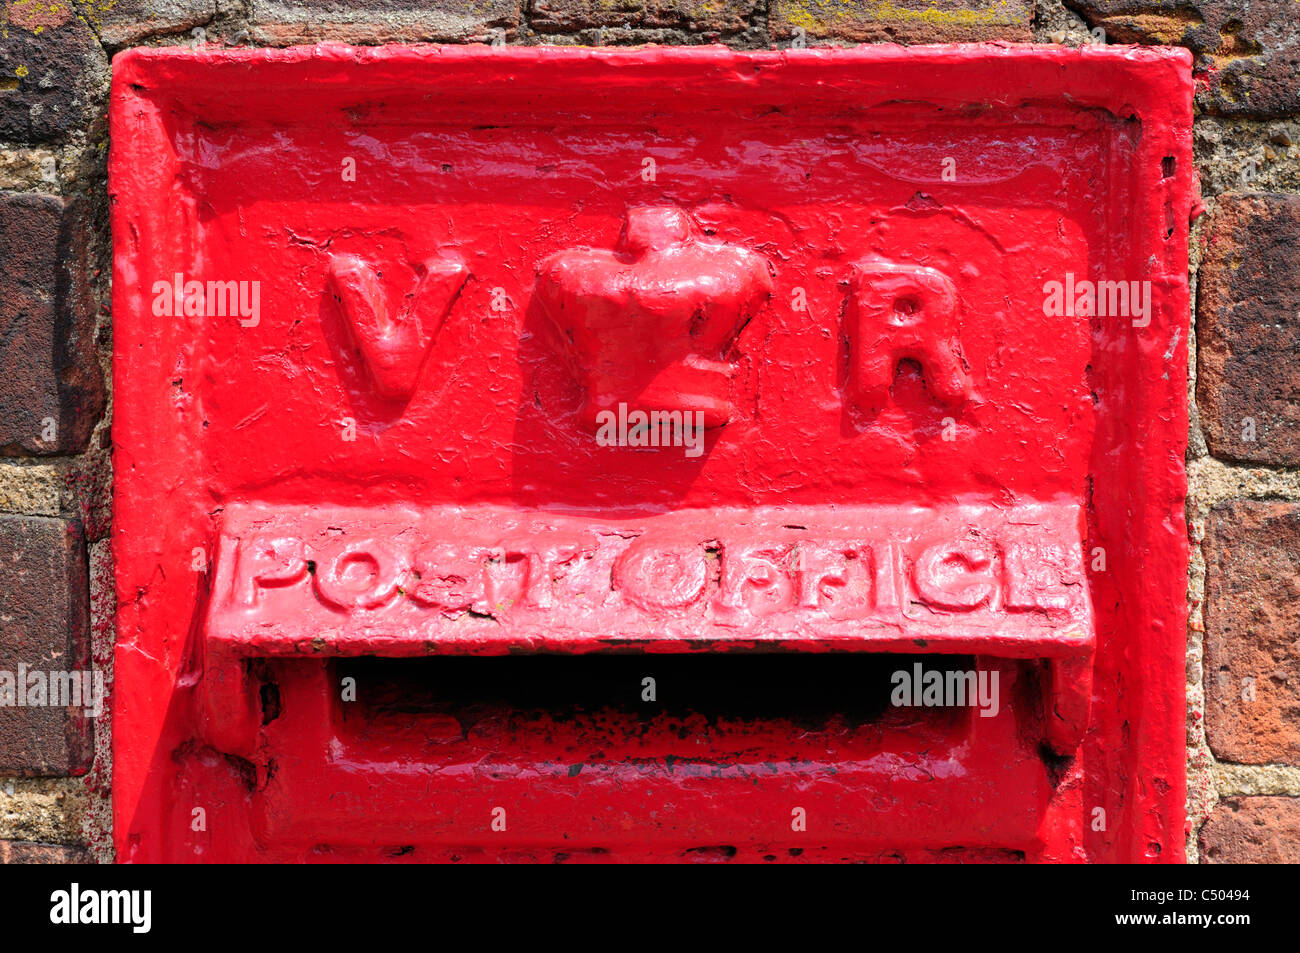 A close-up photo of a red Victorian-made British Royal Mail letter/post box built into a brick wall. Stock Photo